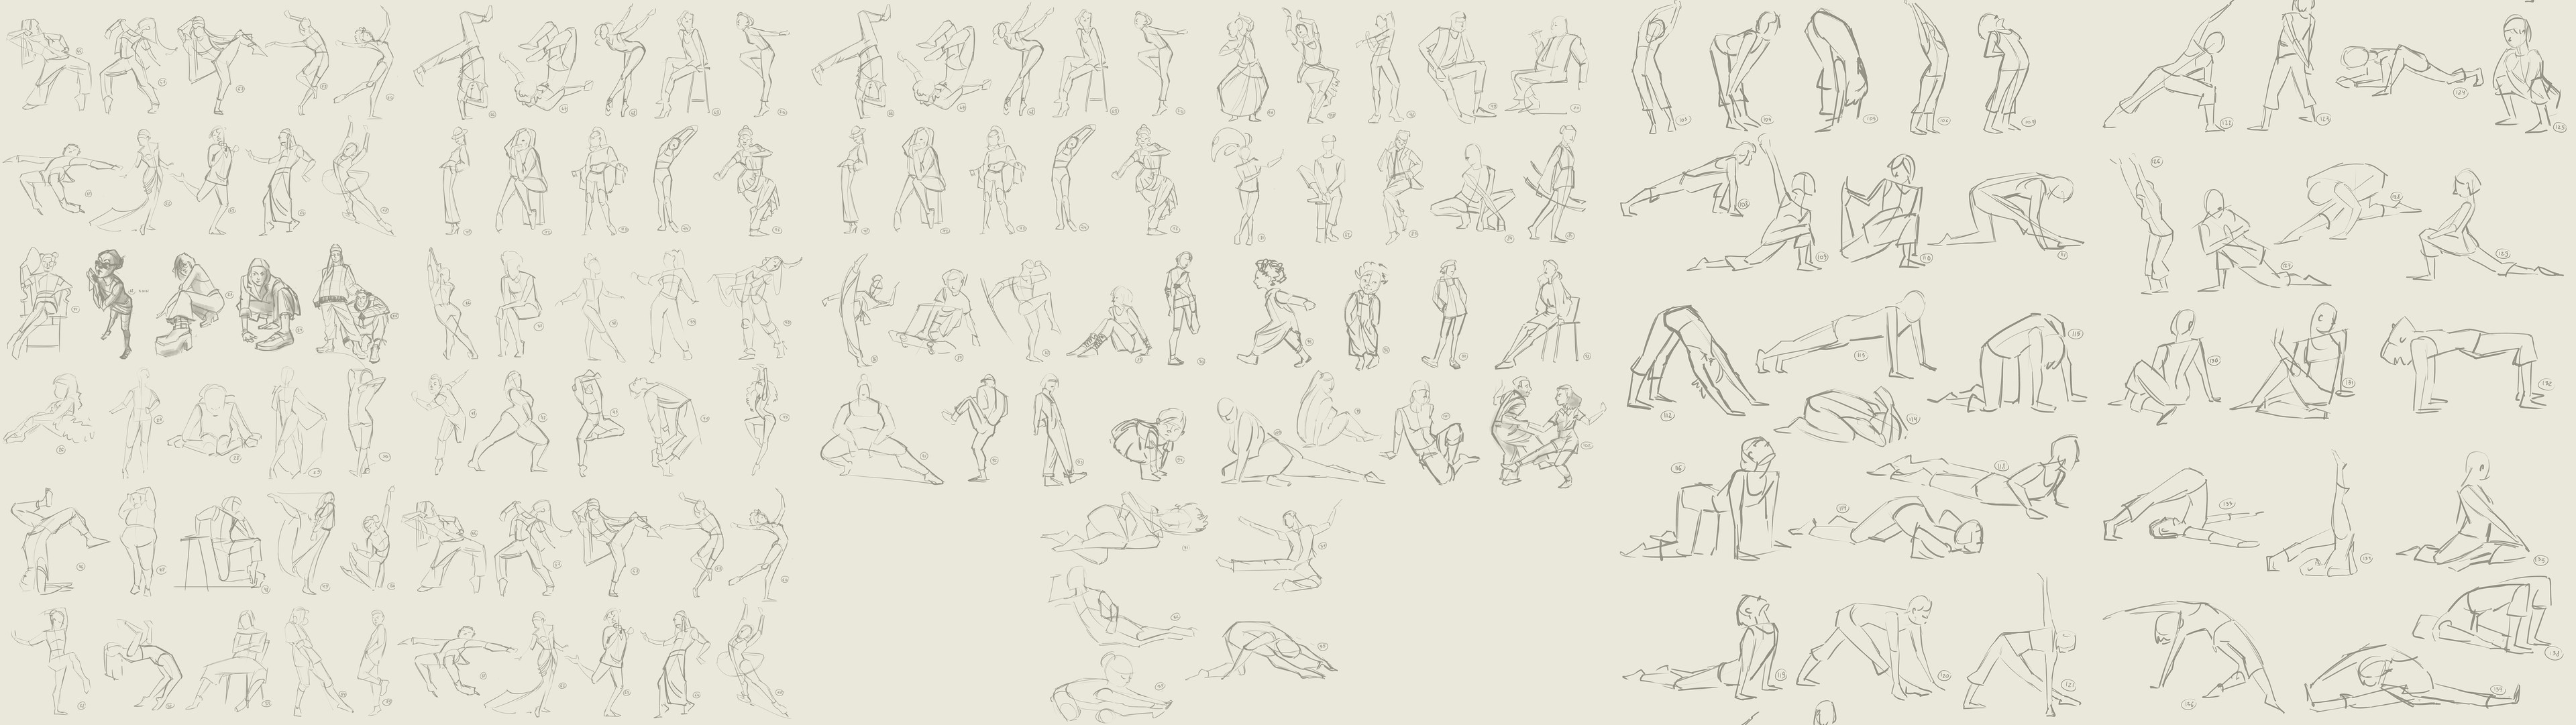 30 sec to 5 min gesture sketches from Projector workshop